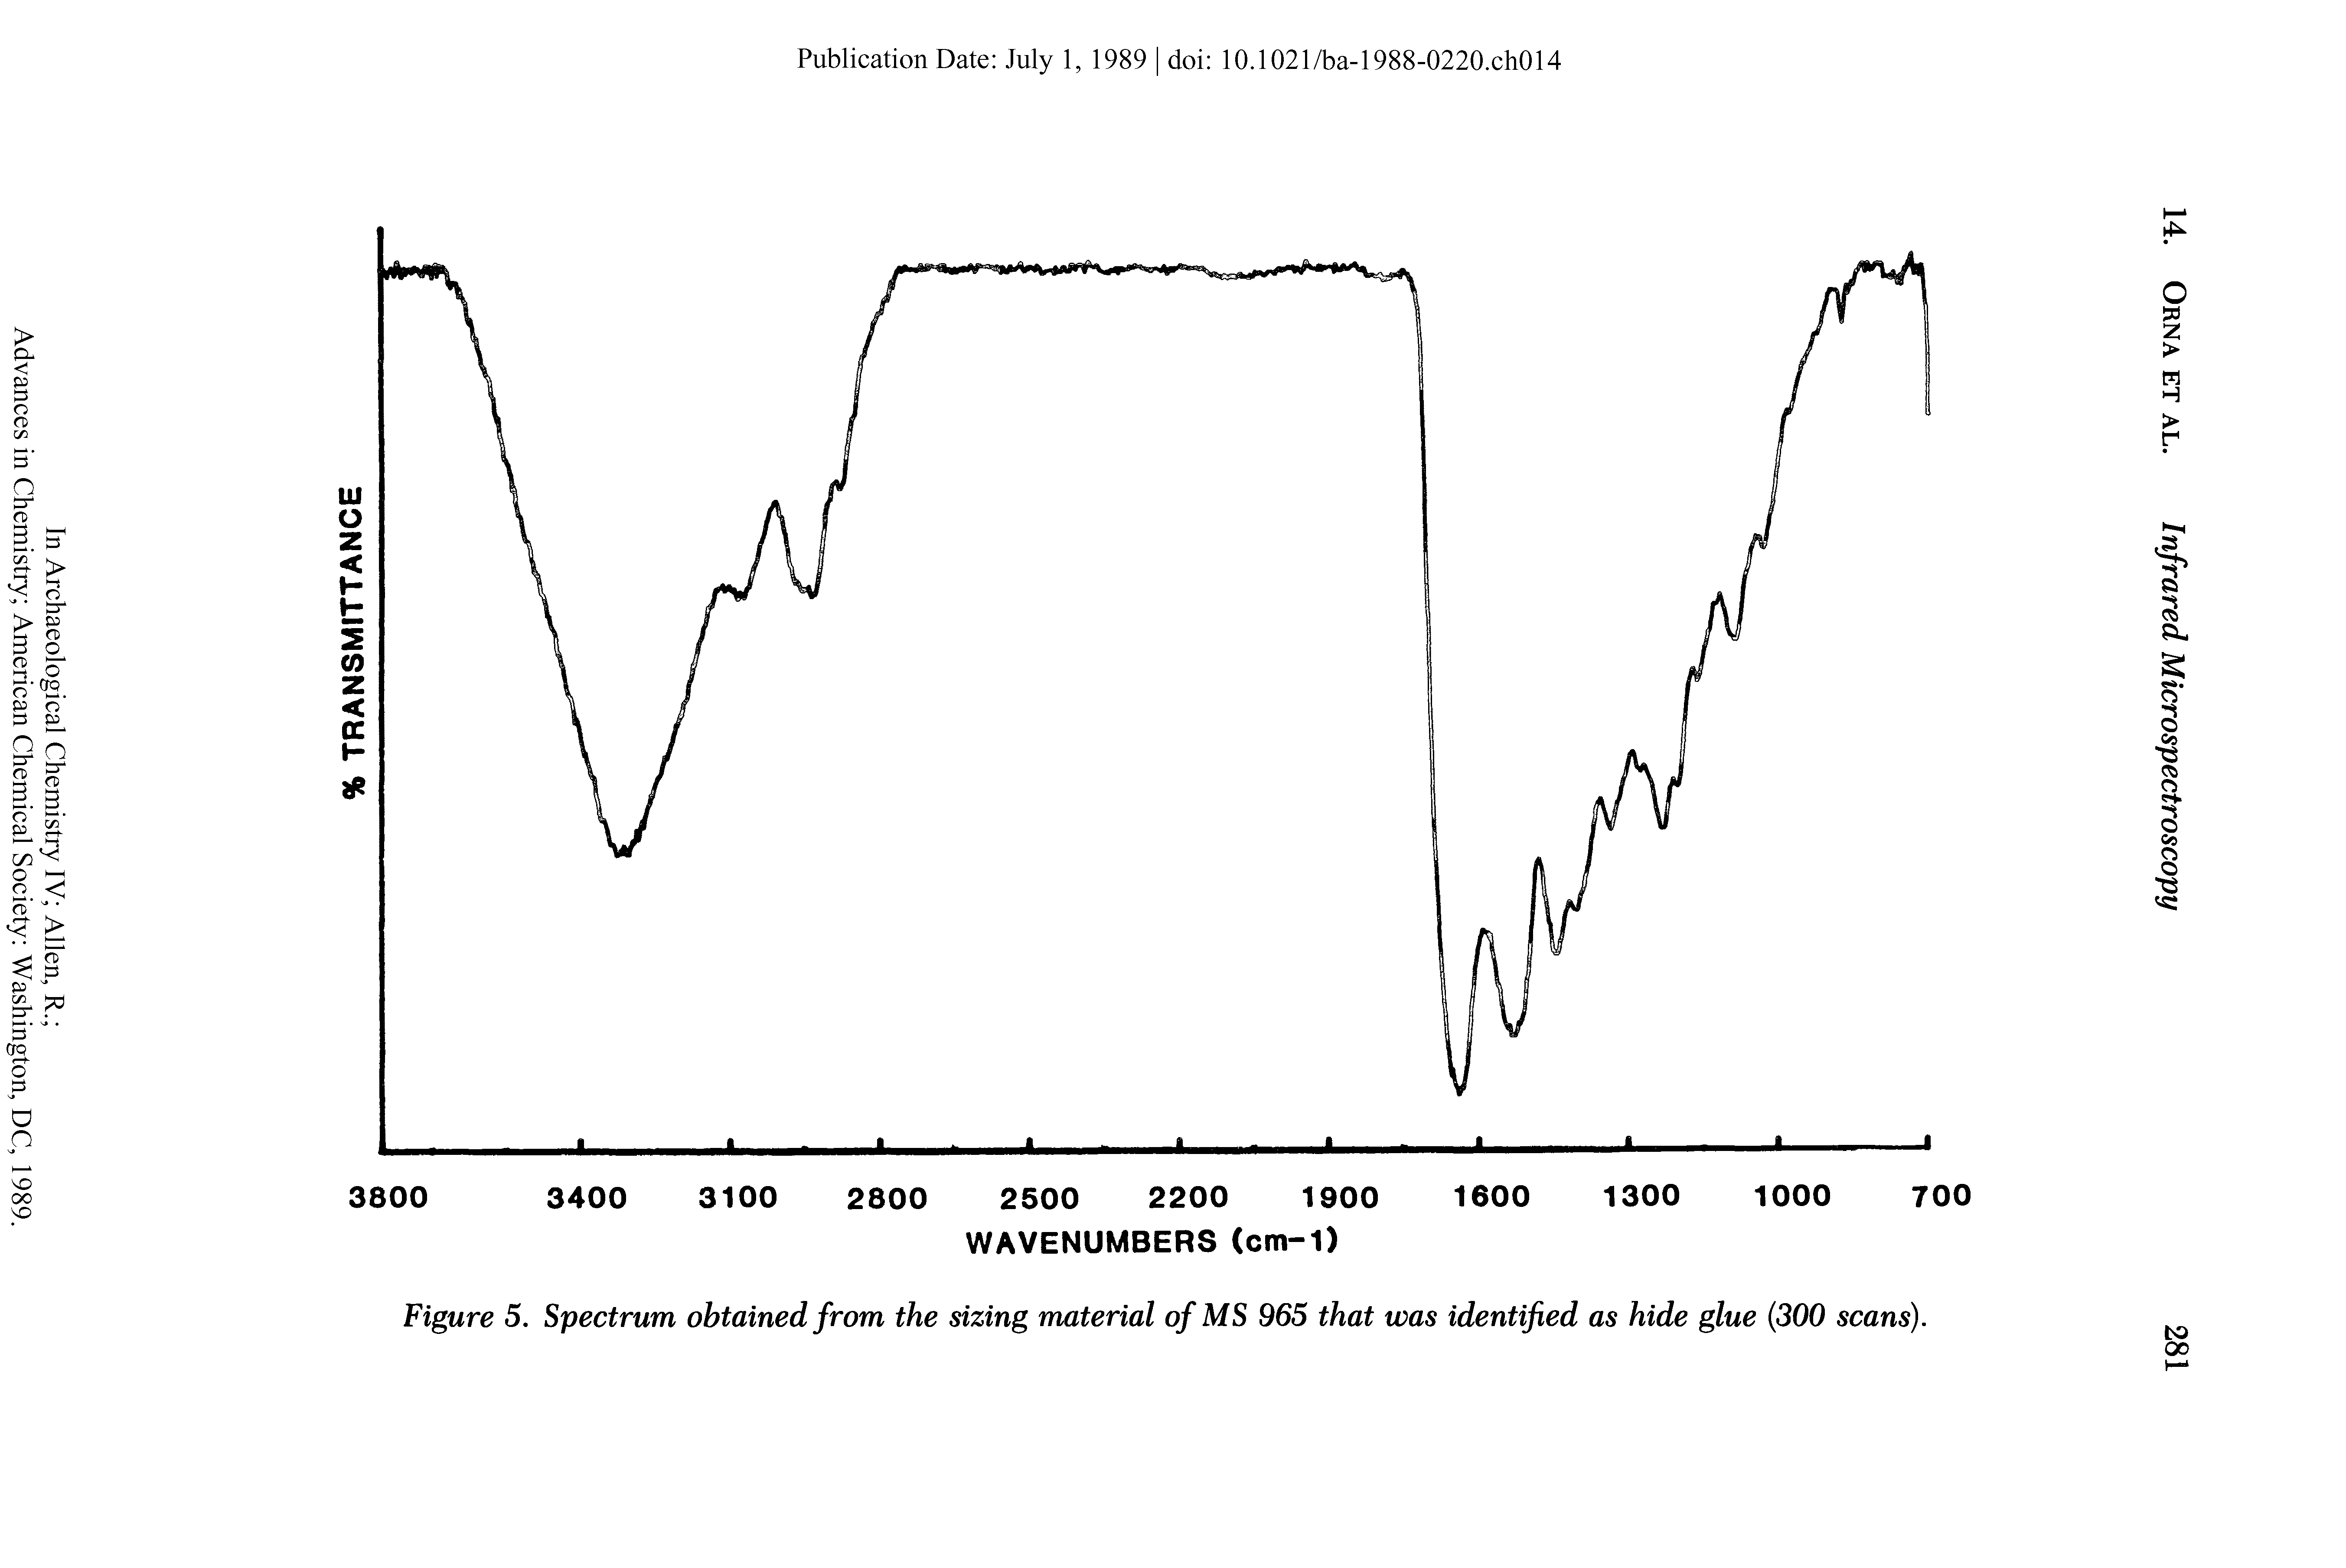 Figure 5. Spectrum obtained from the sizing material of MS 965 that was identified as hide glue (300 scans).